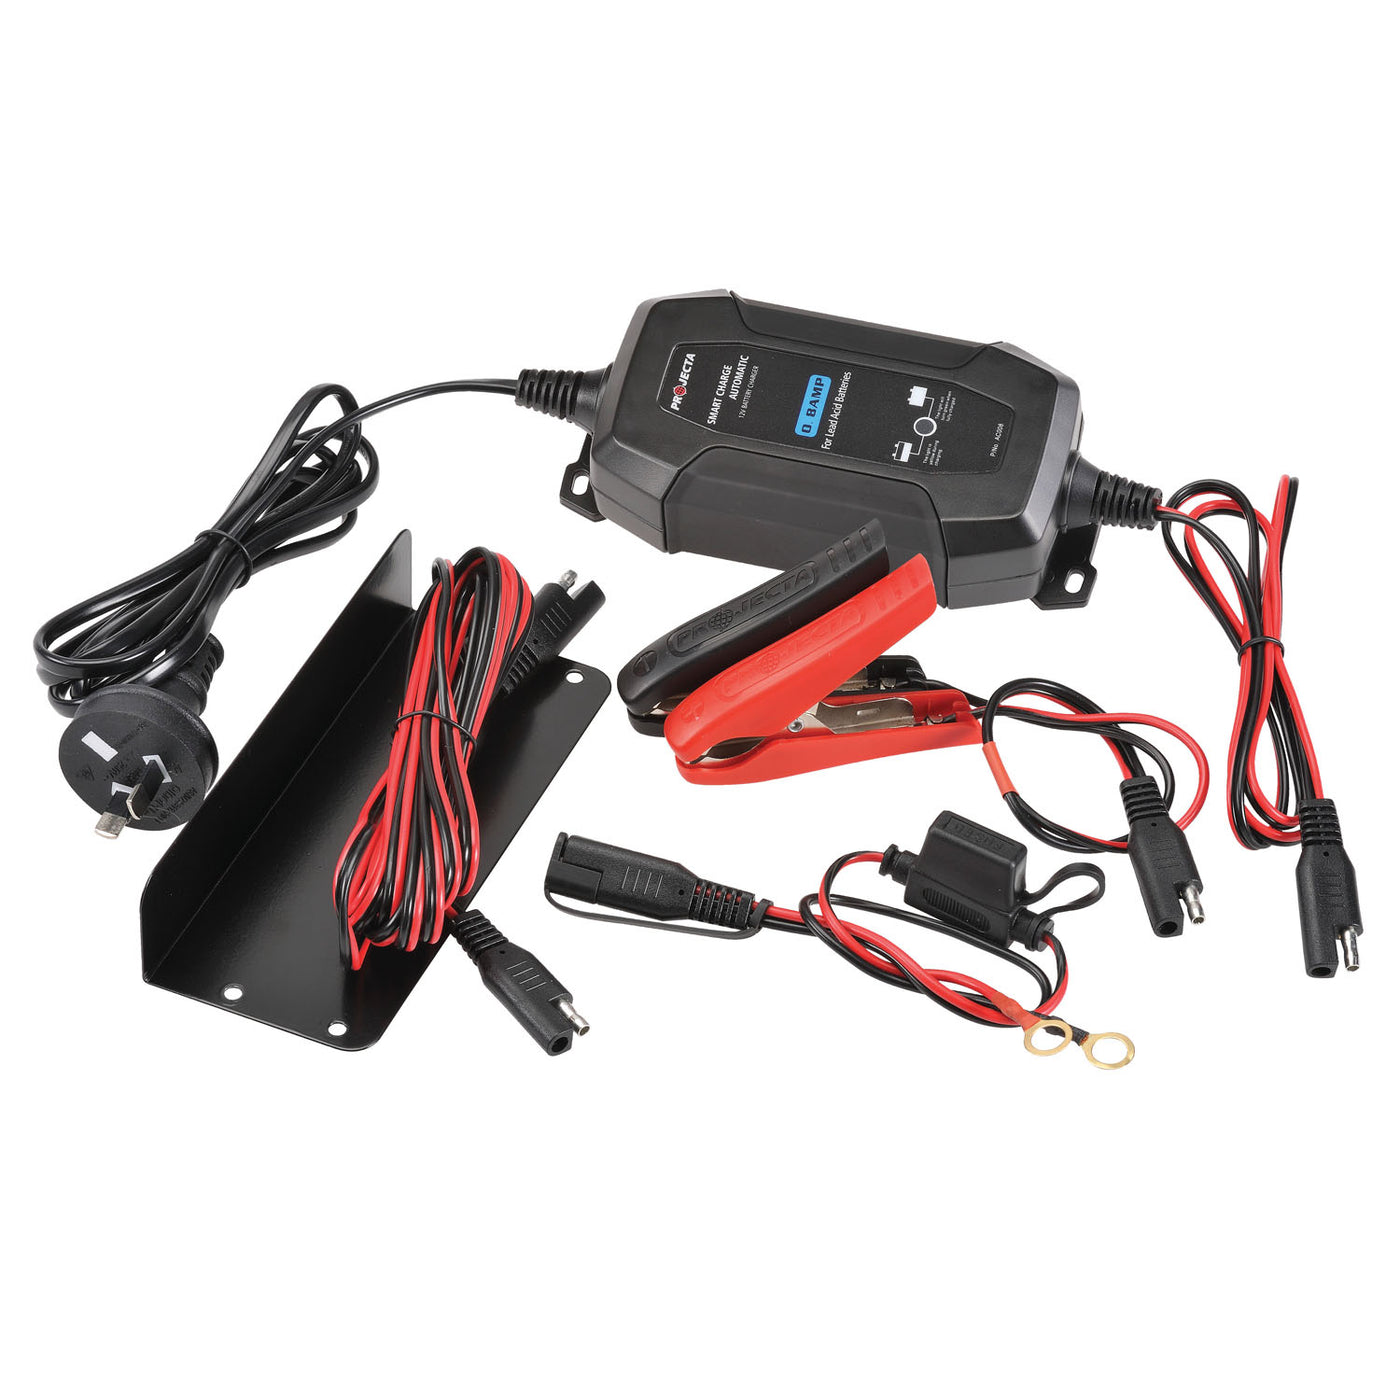 Charge N Maintain AC015, 4 Stage Battery Charger, 1.5A 12V